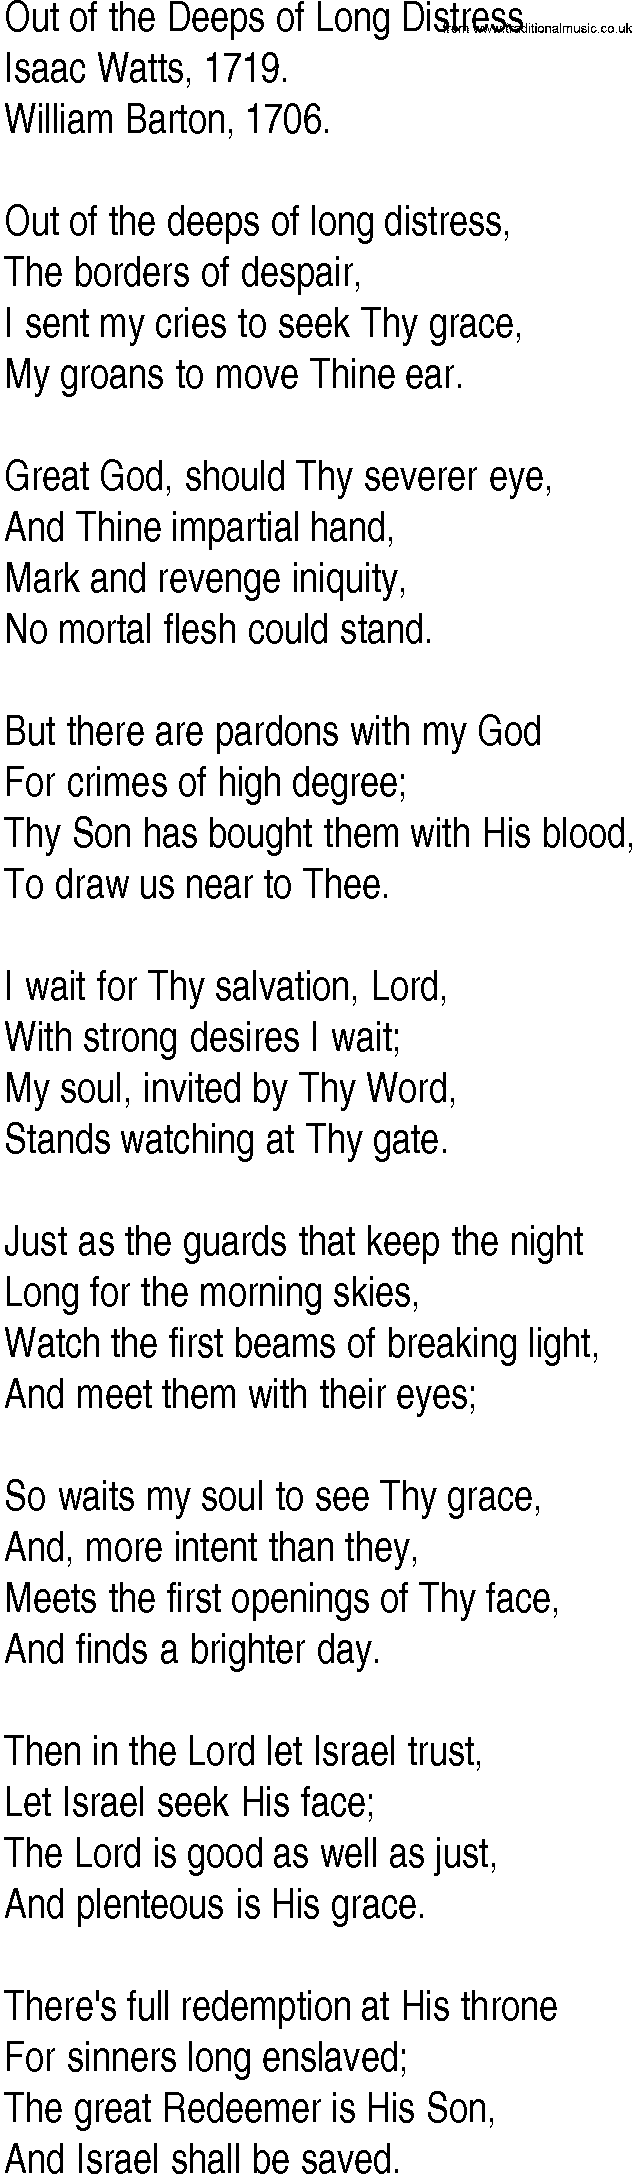 Hymn and Gospel Song: Out of the Deeps of Long Distress by Isaac Watts lyrics